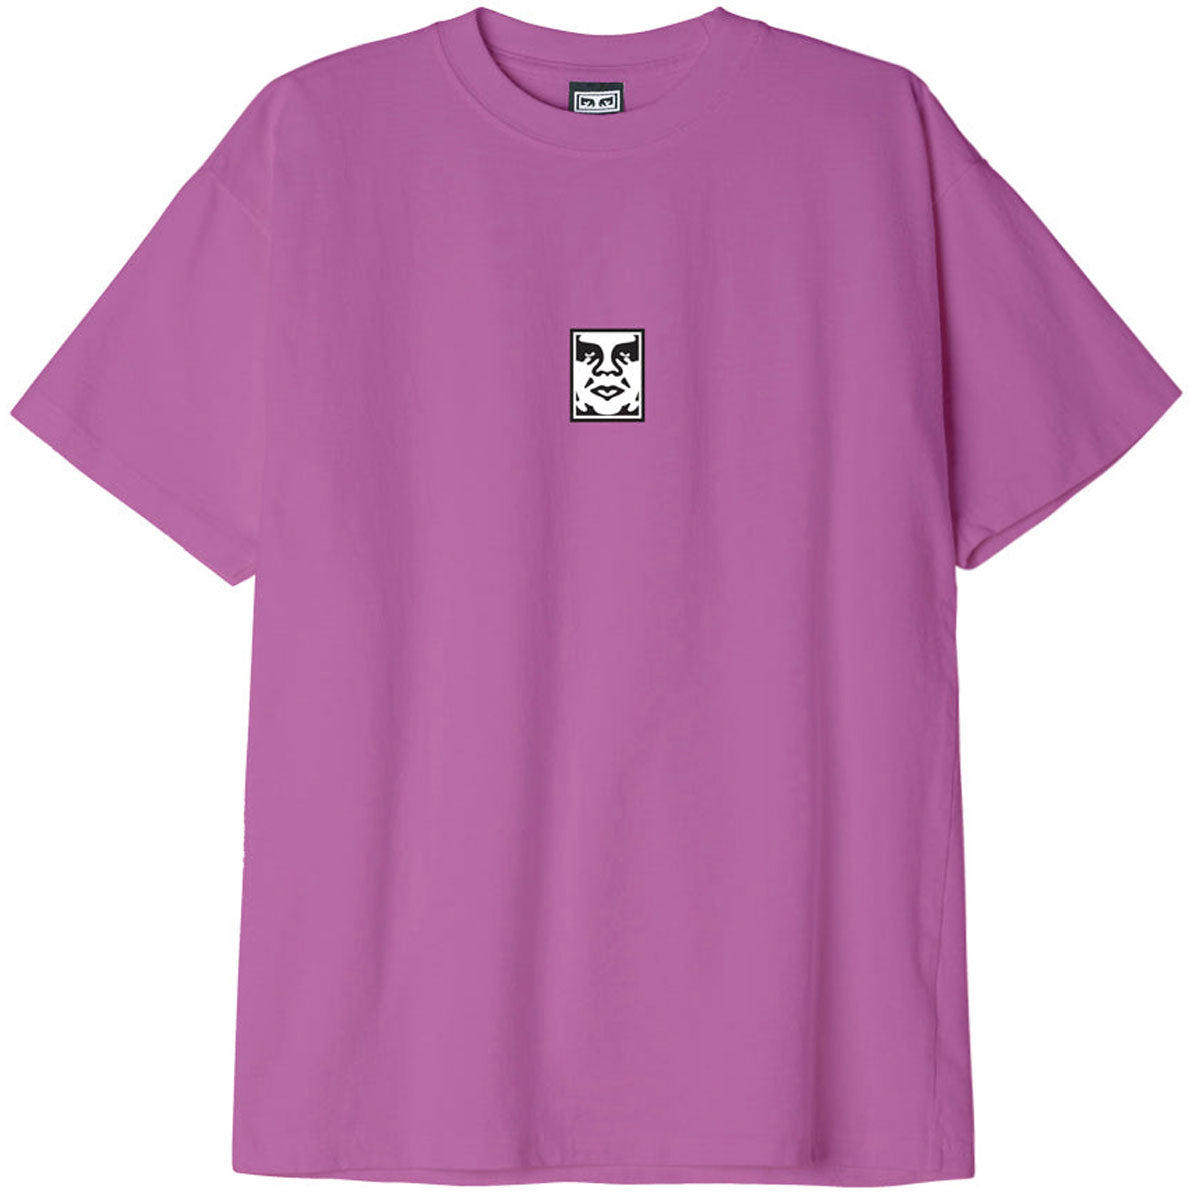 Obey Icon Heavyweight T-Shirt - Mulberry Purple image 1